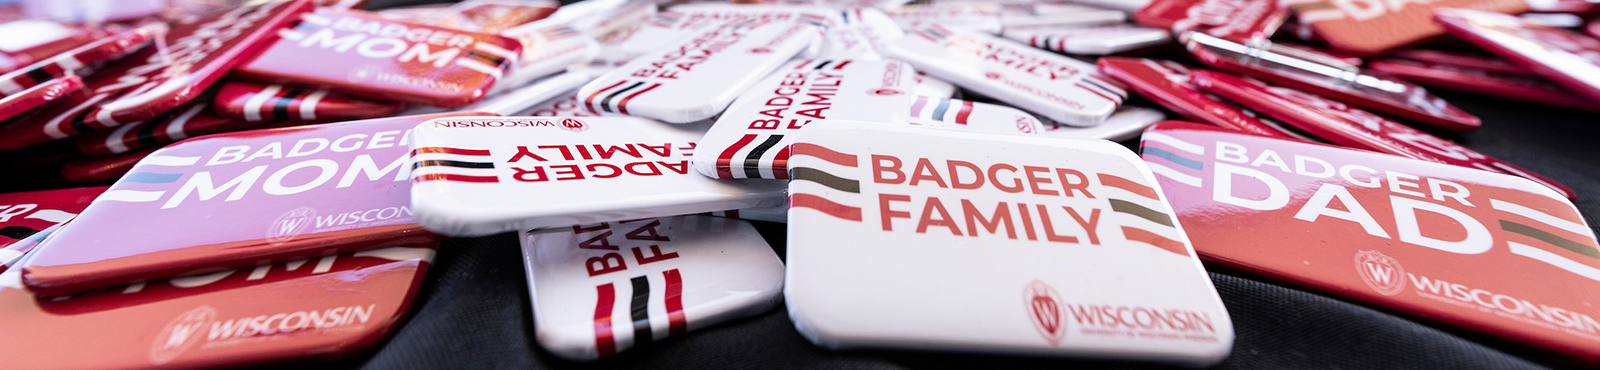 Assorted branded buttons with "Badger Family" printed on them